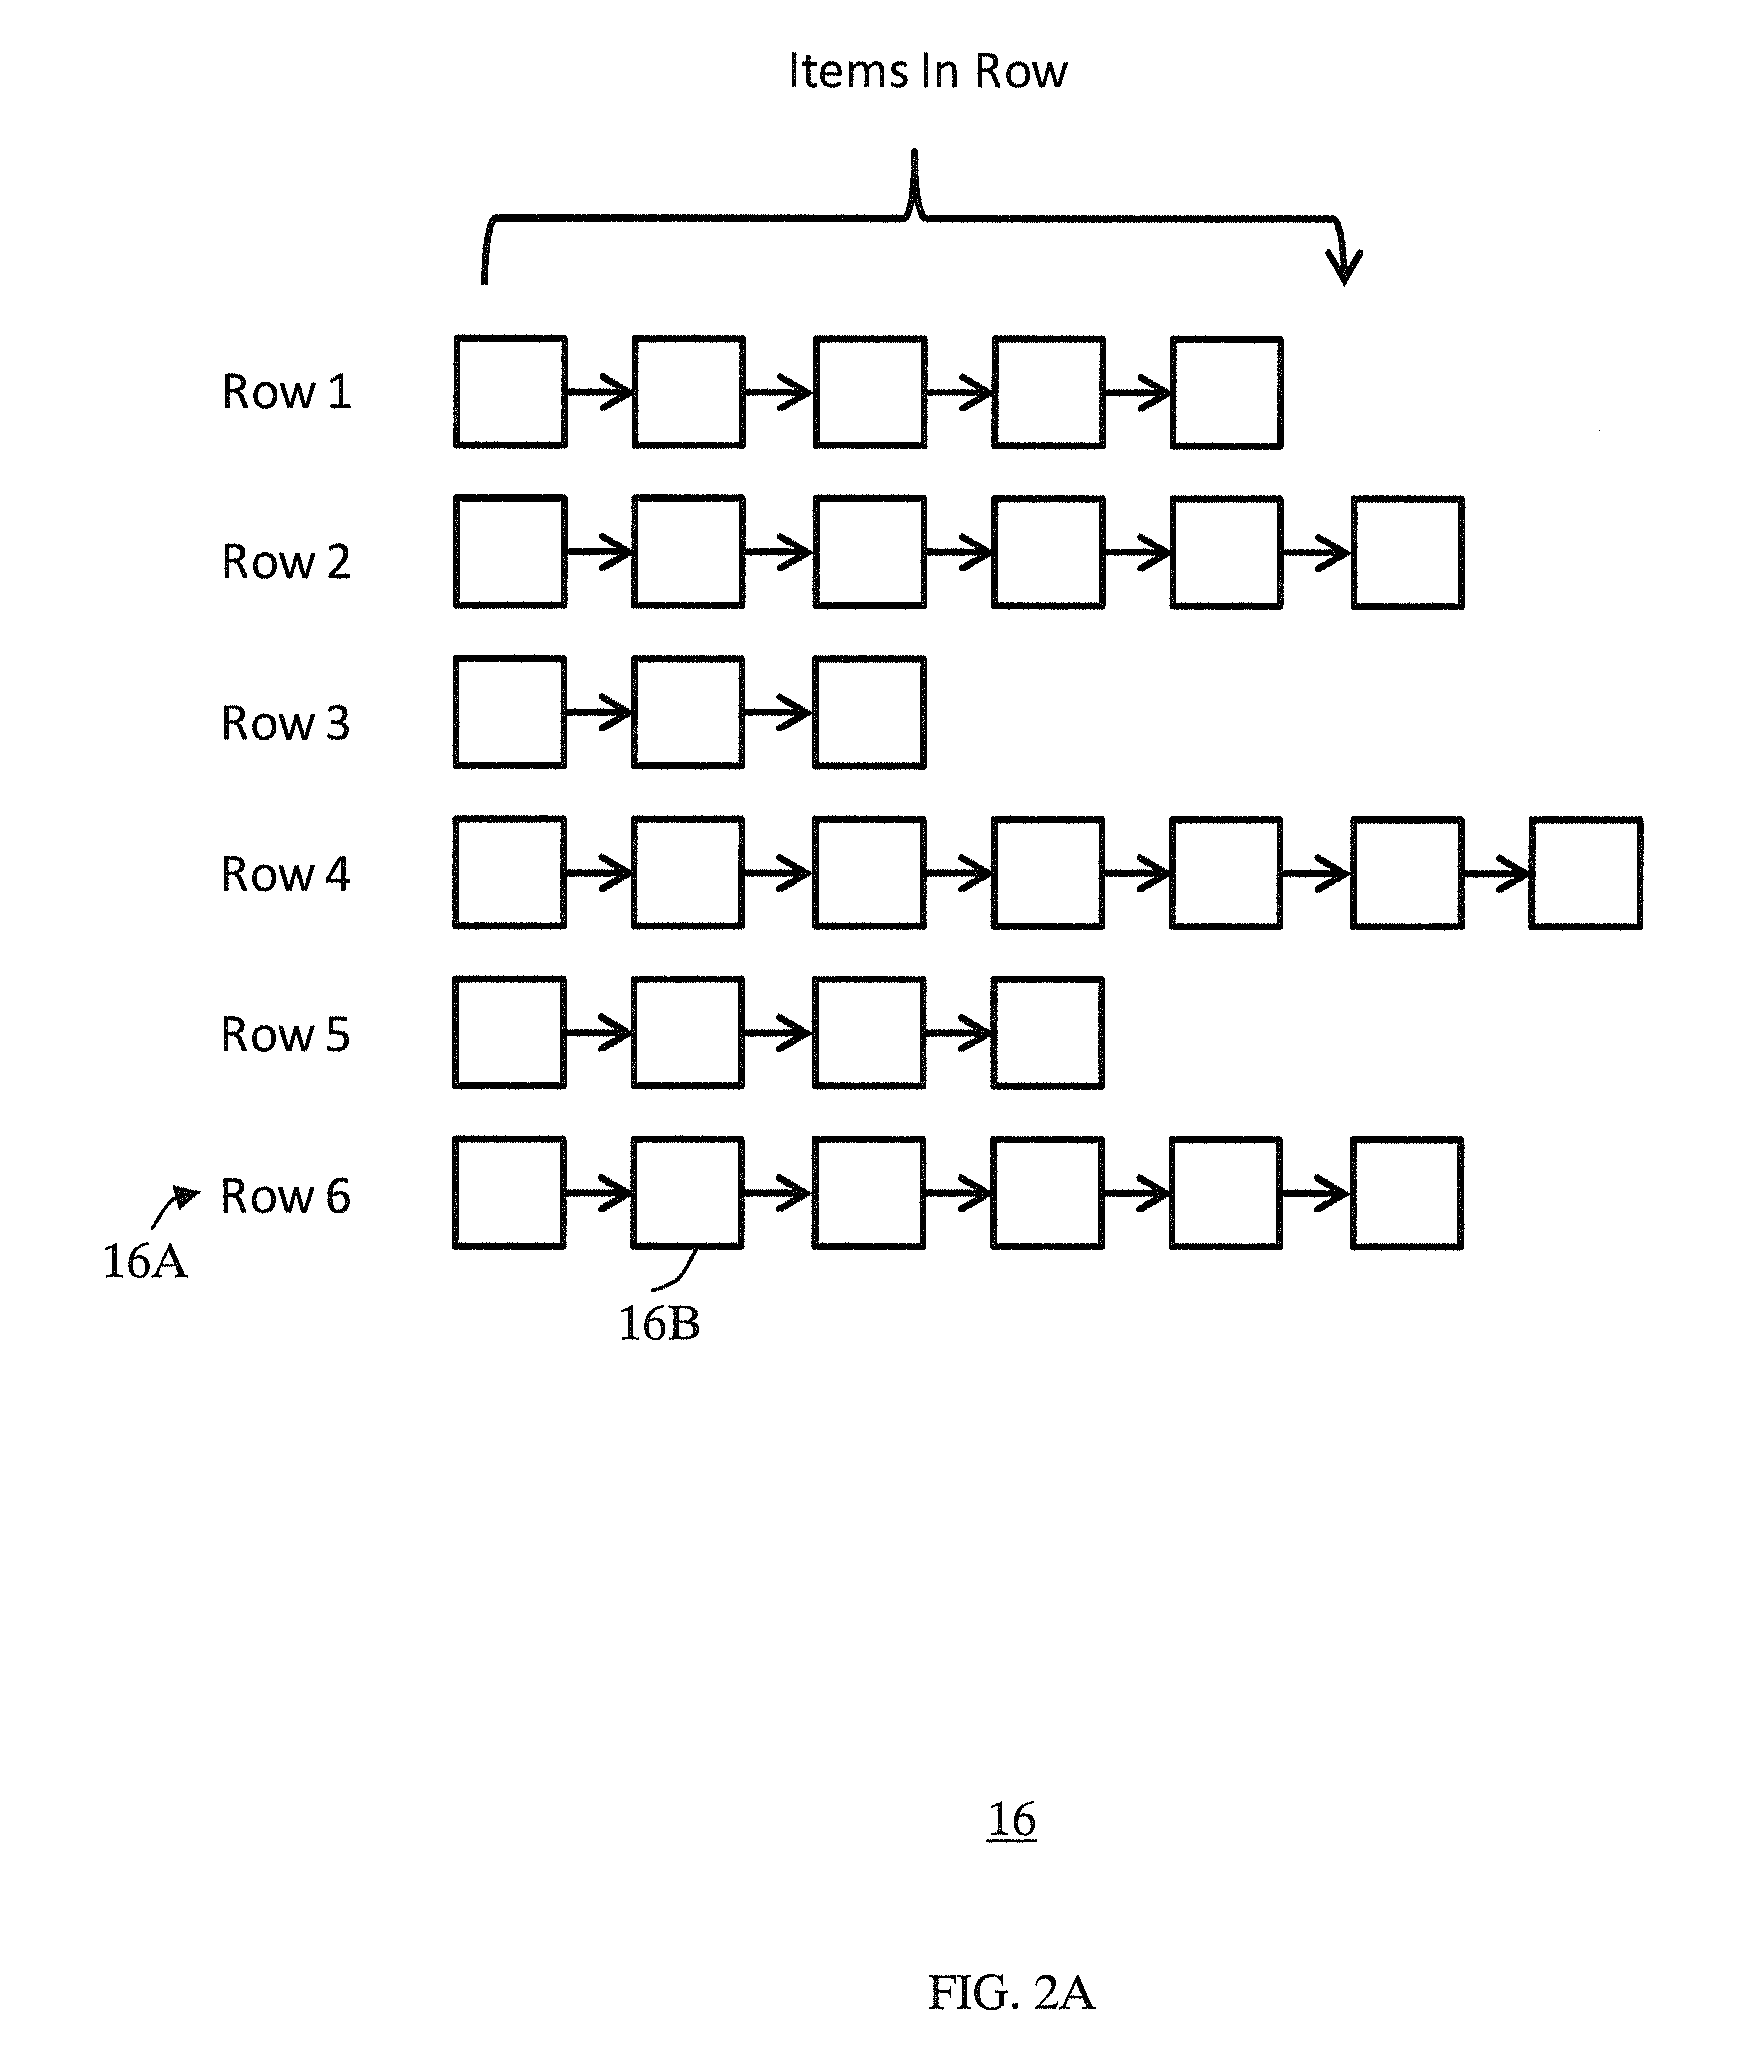 Cache system optimized for cache miss detection